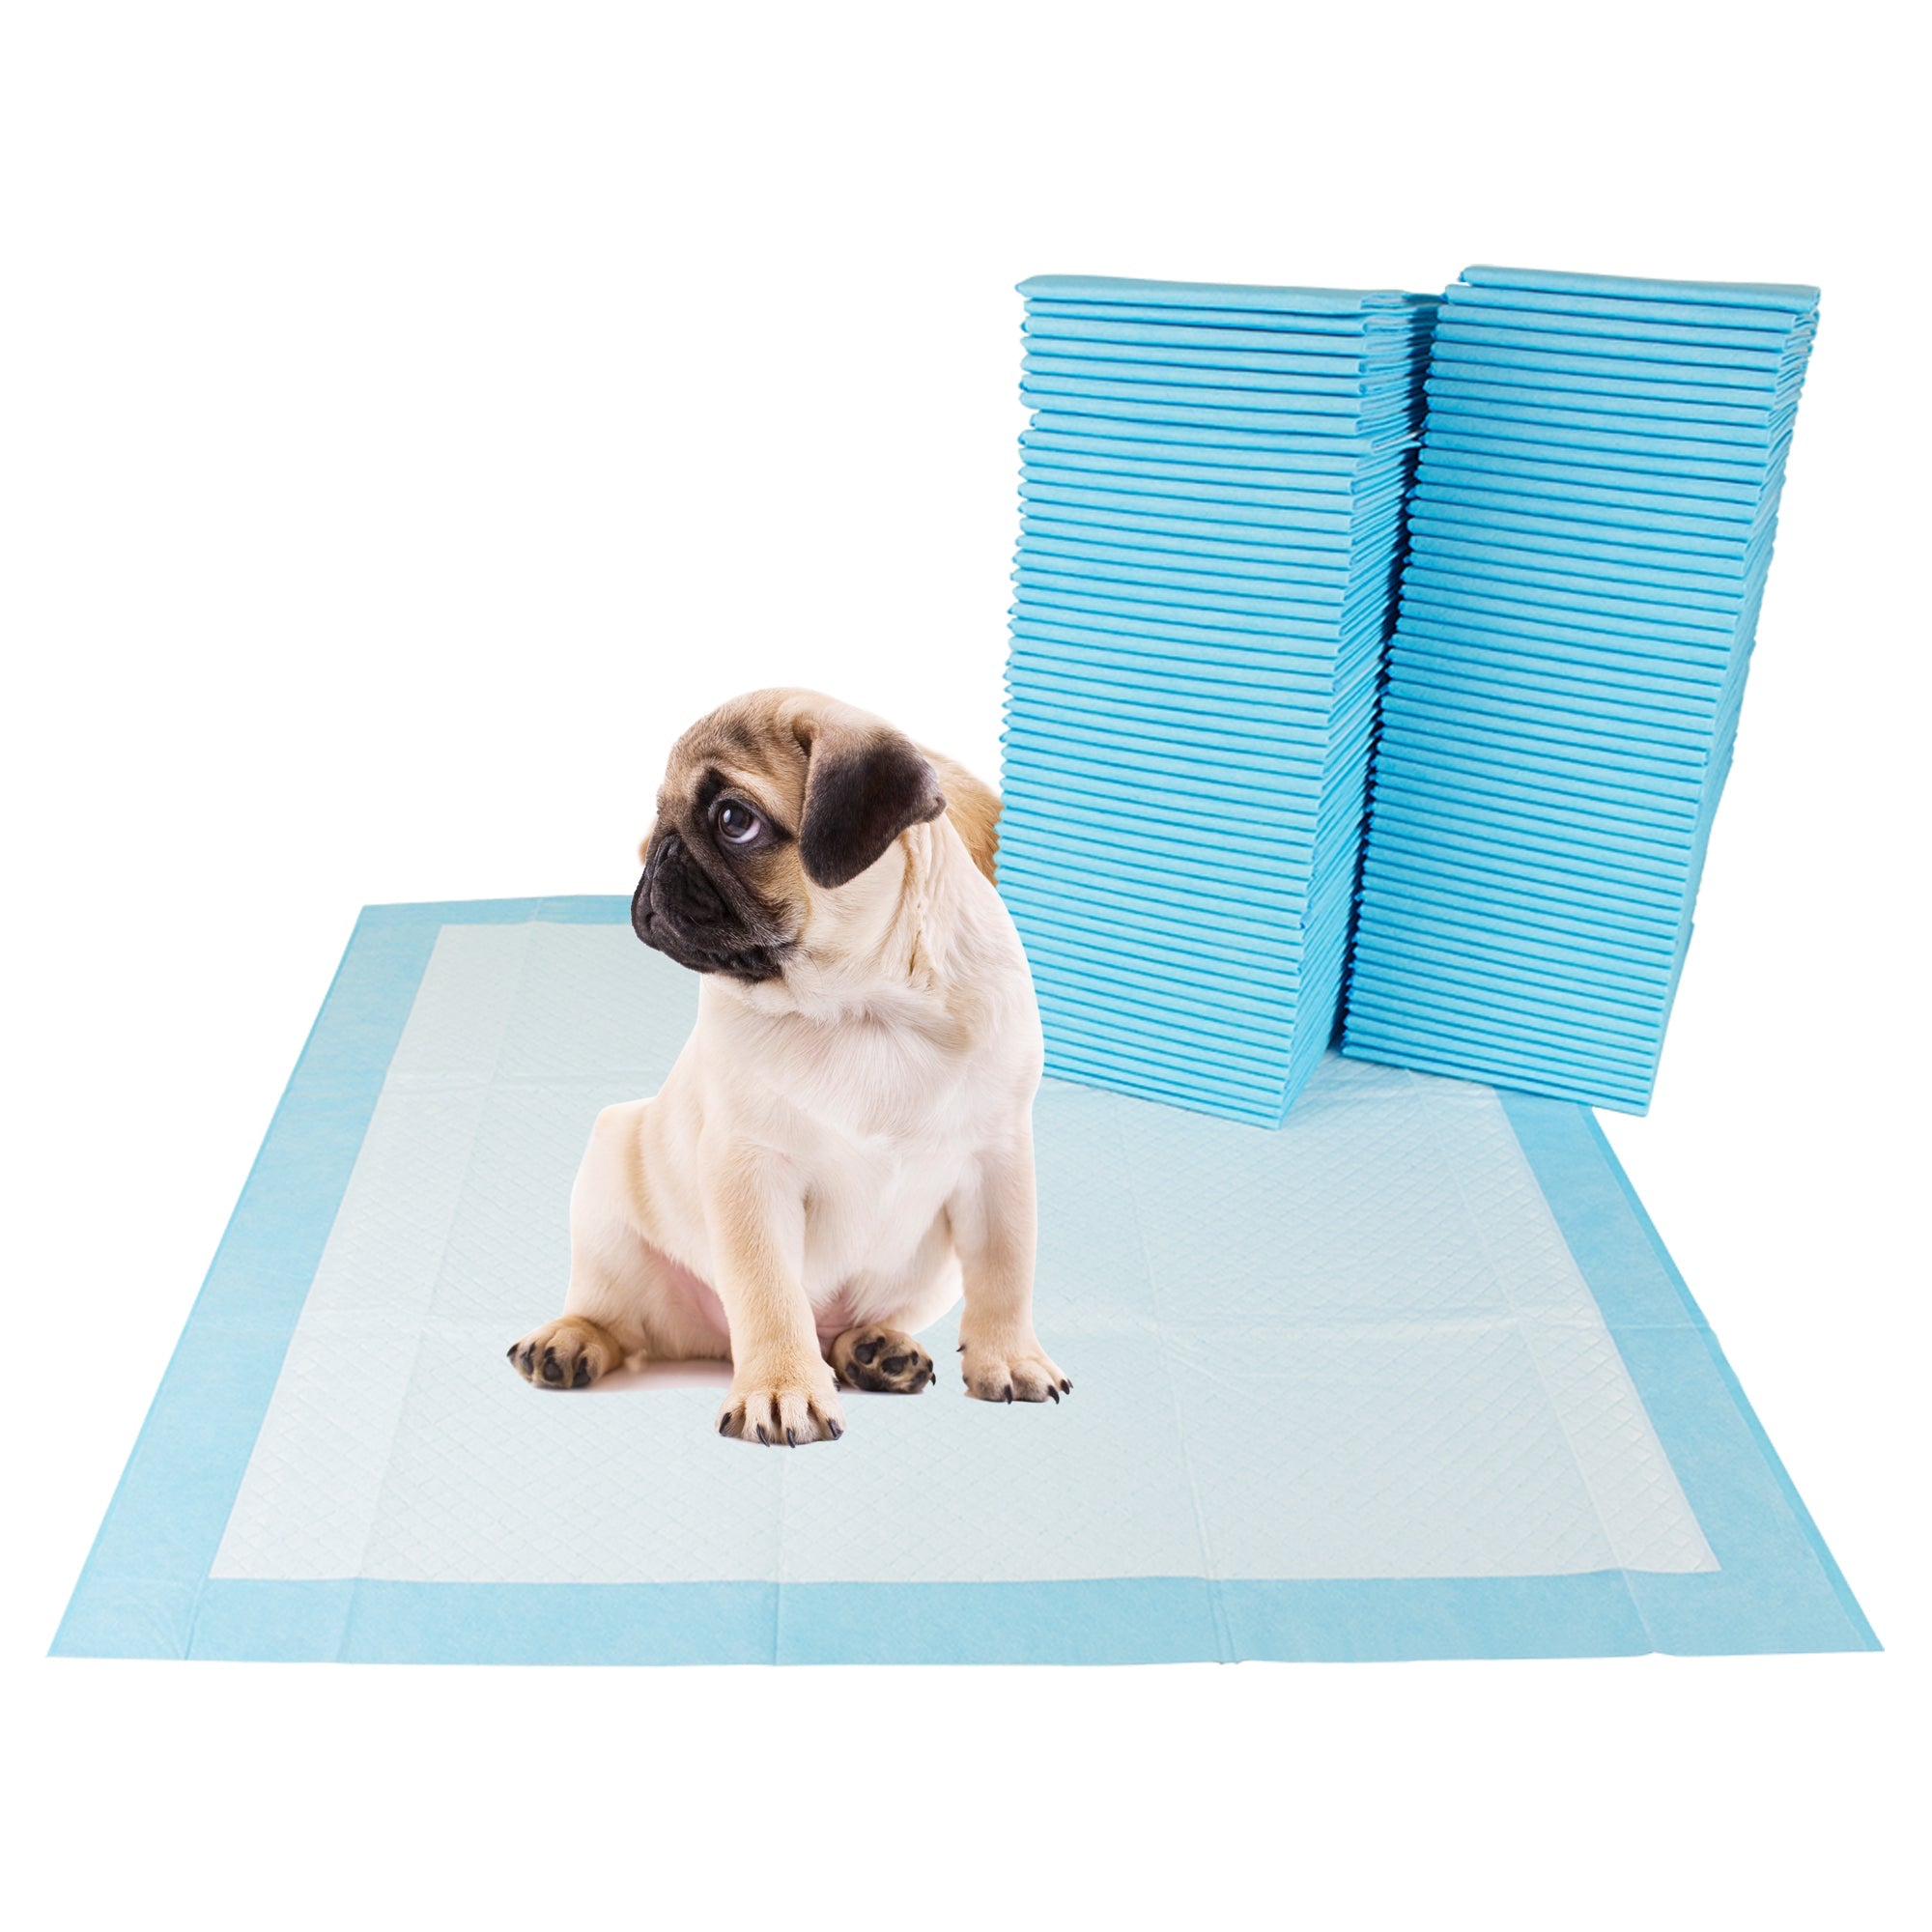 BV Pet Potty Training Pads for Dogs, Puppy, 22